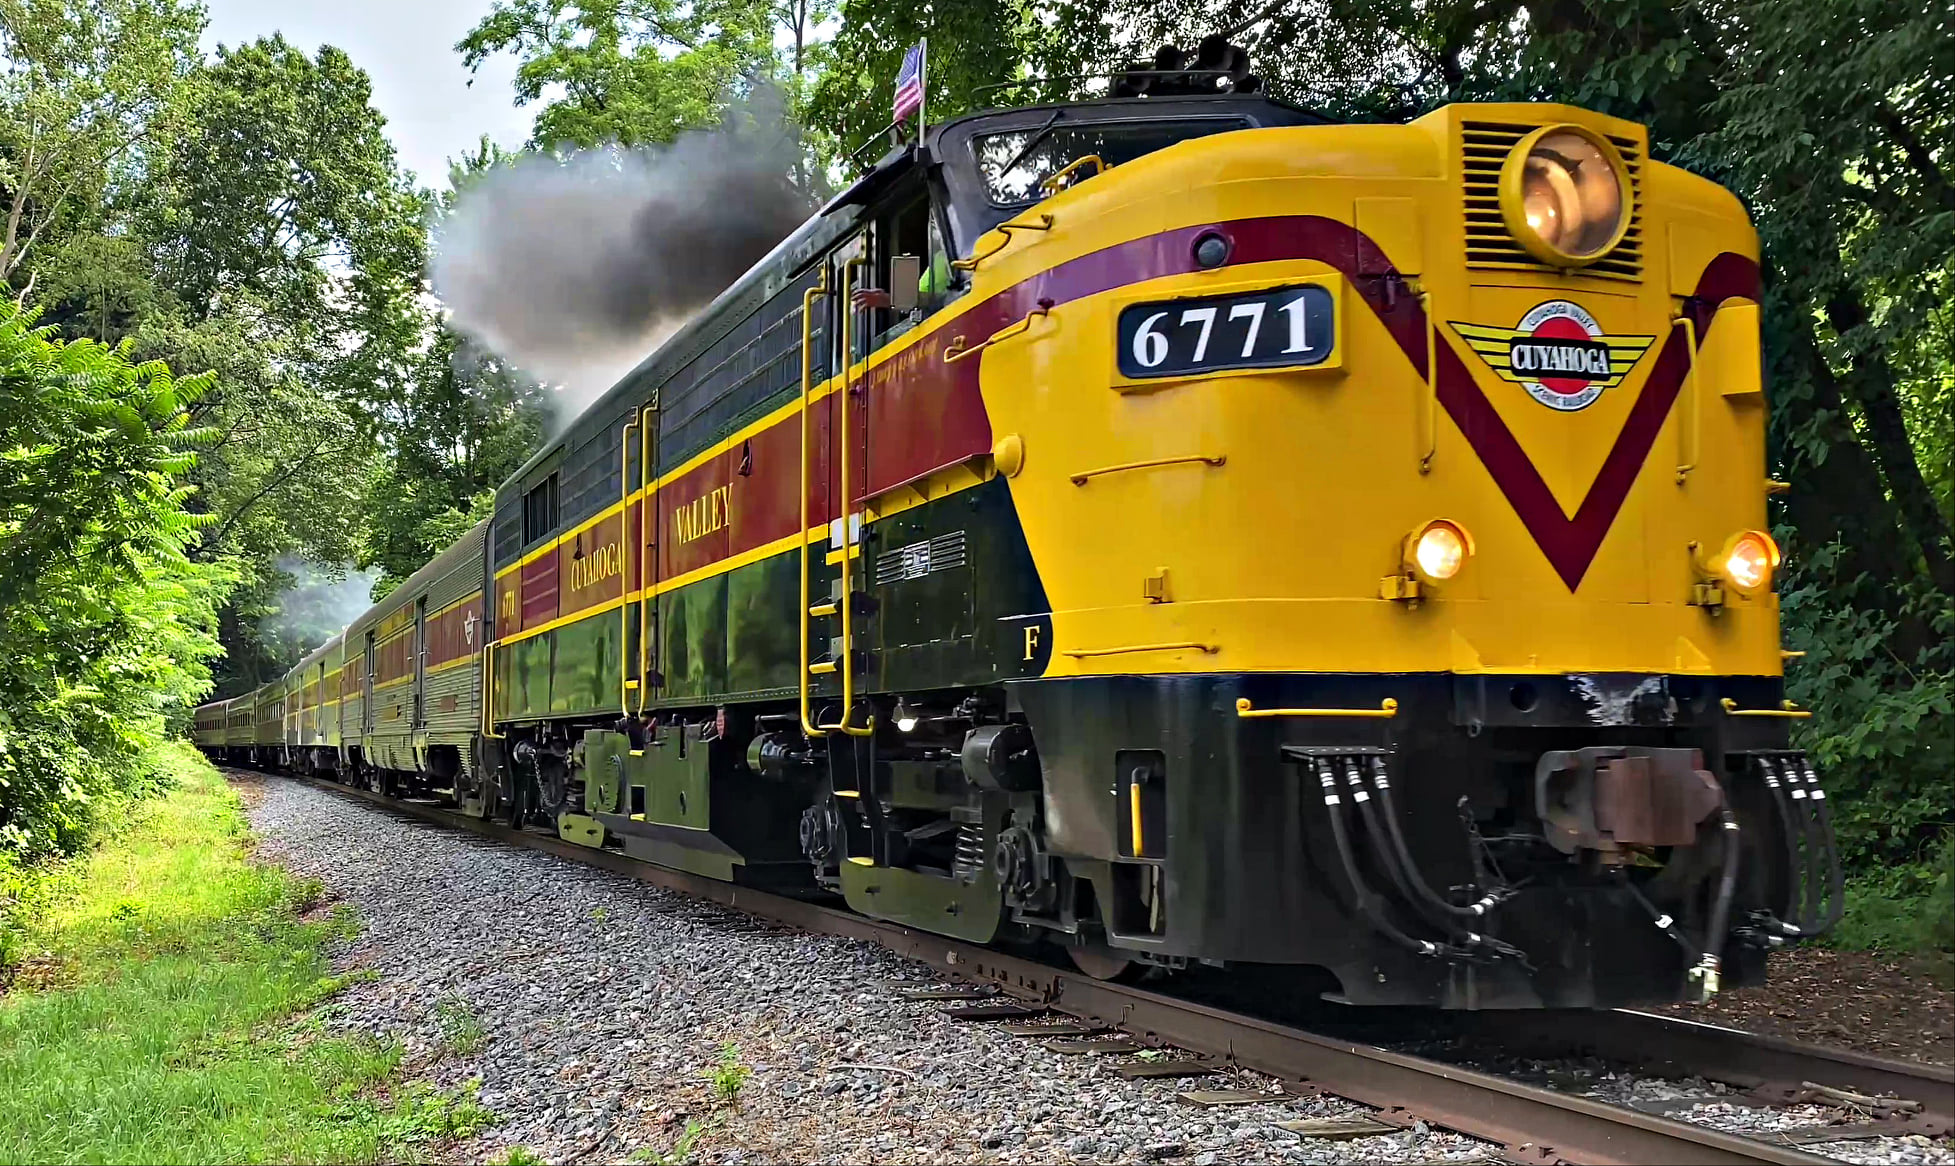 Cuyahoga Valley Scenic Railroad train on tracks surrounded by green foliage